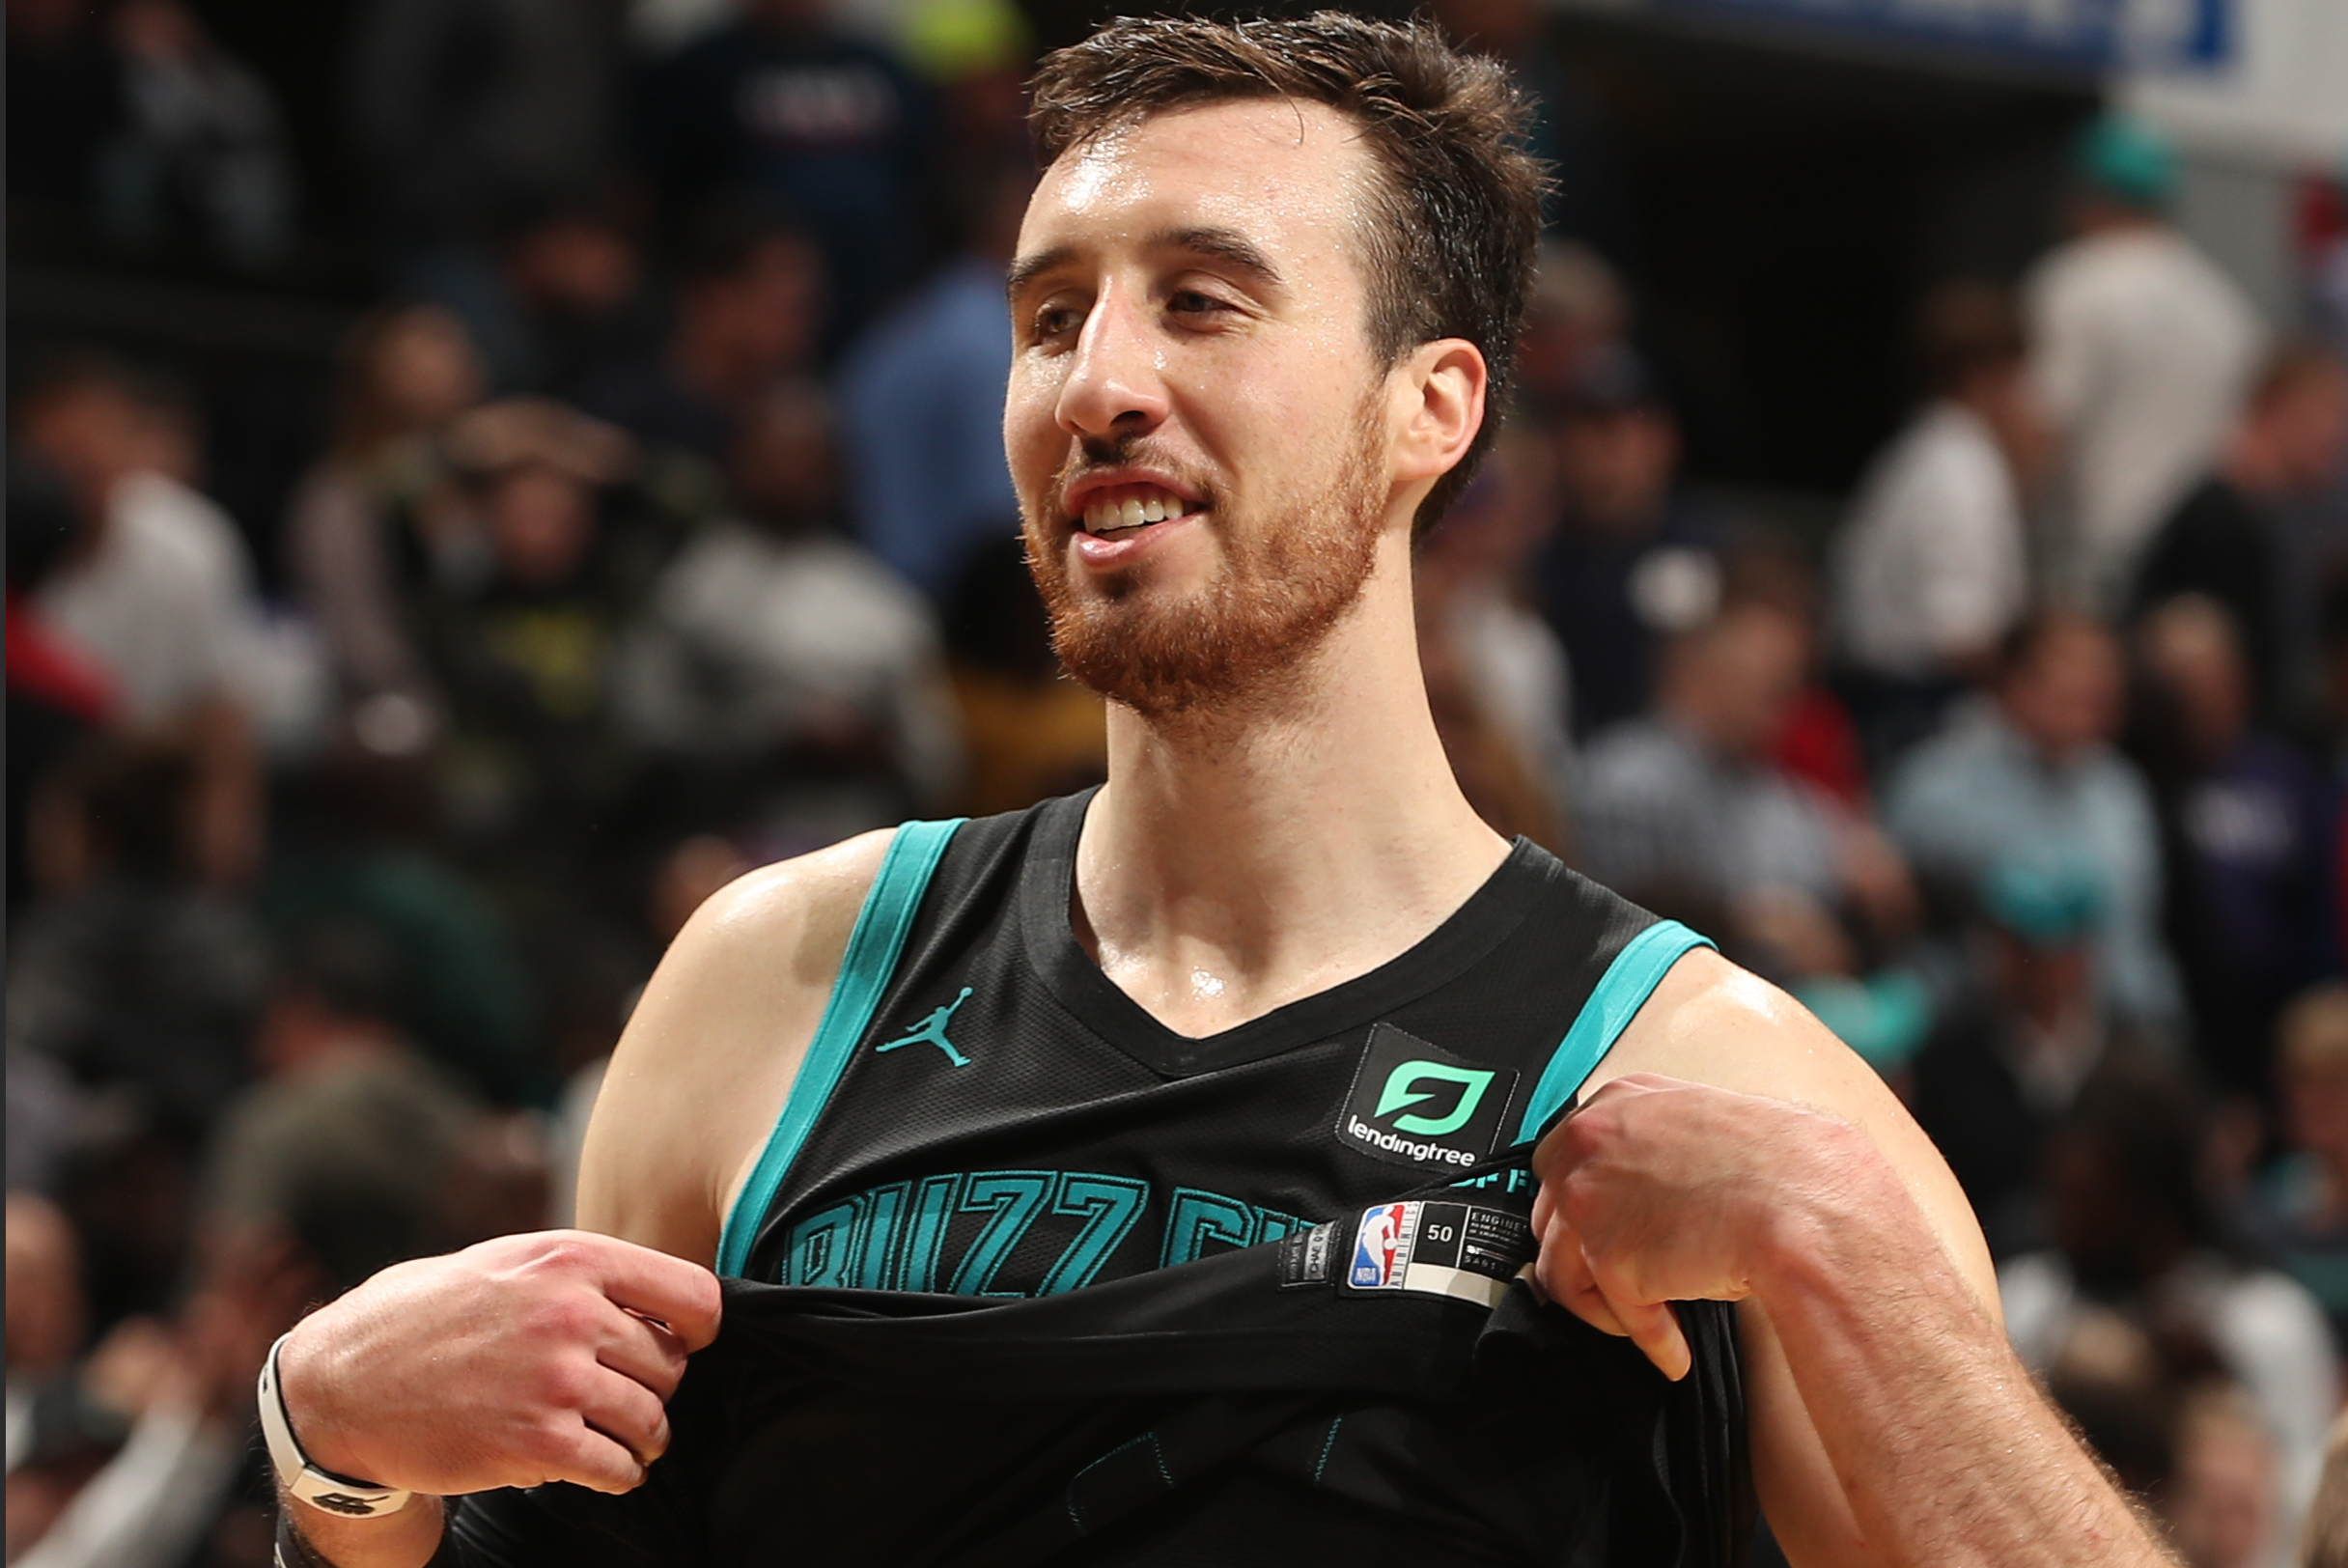 Let's be Frank: Kaminsky's Sporting News' Player of the Year